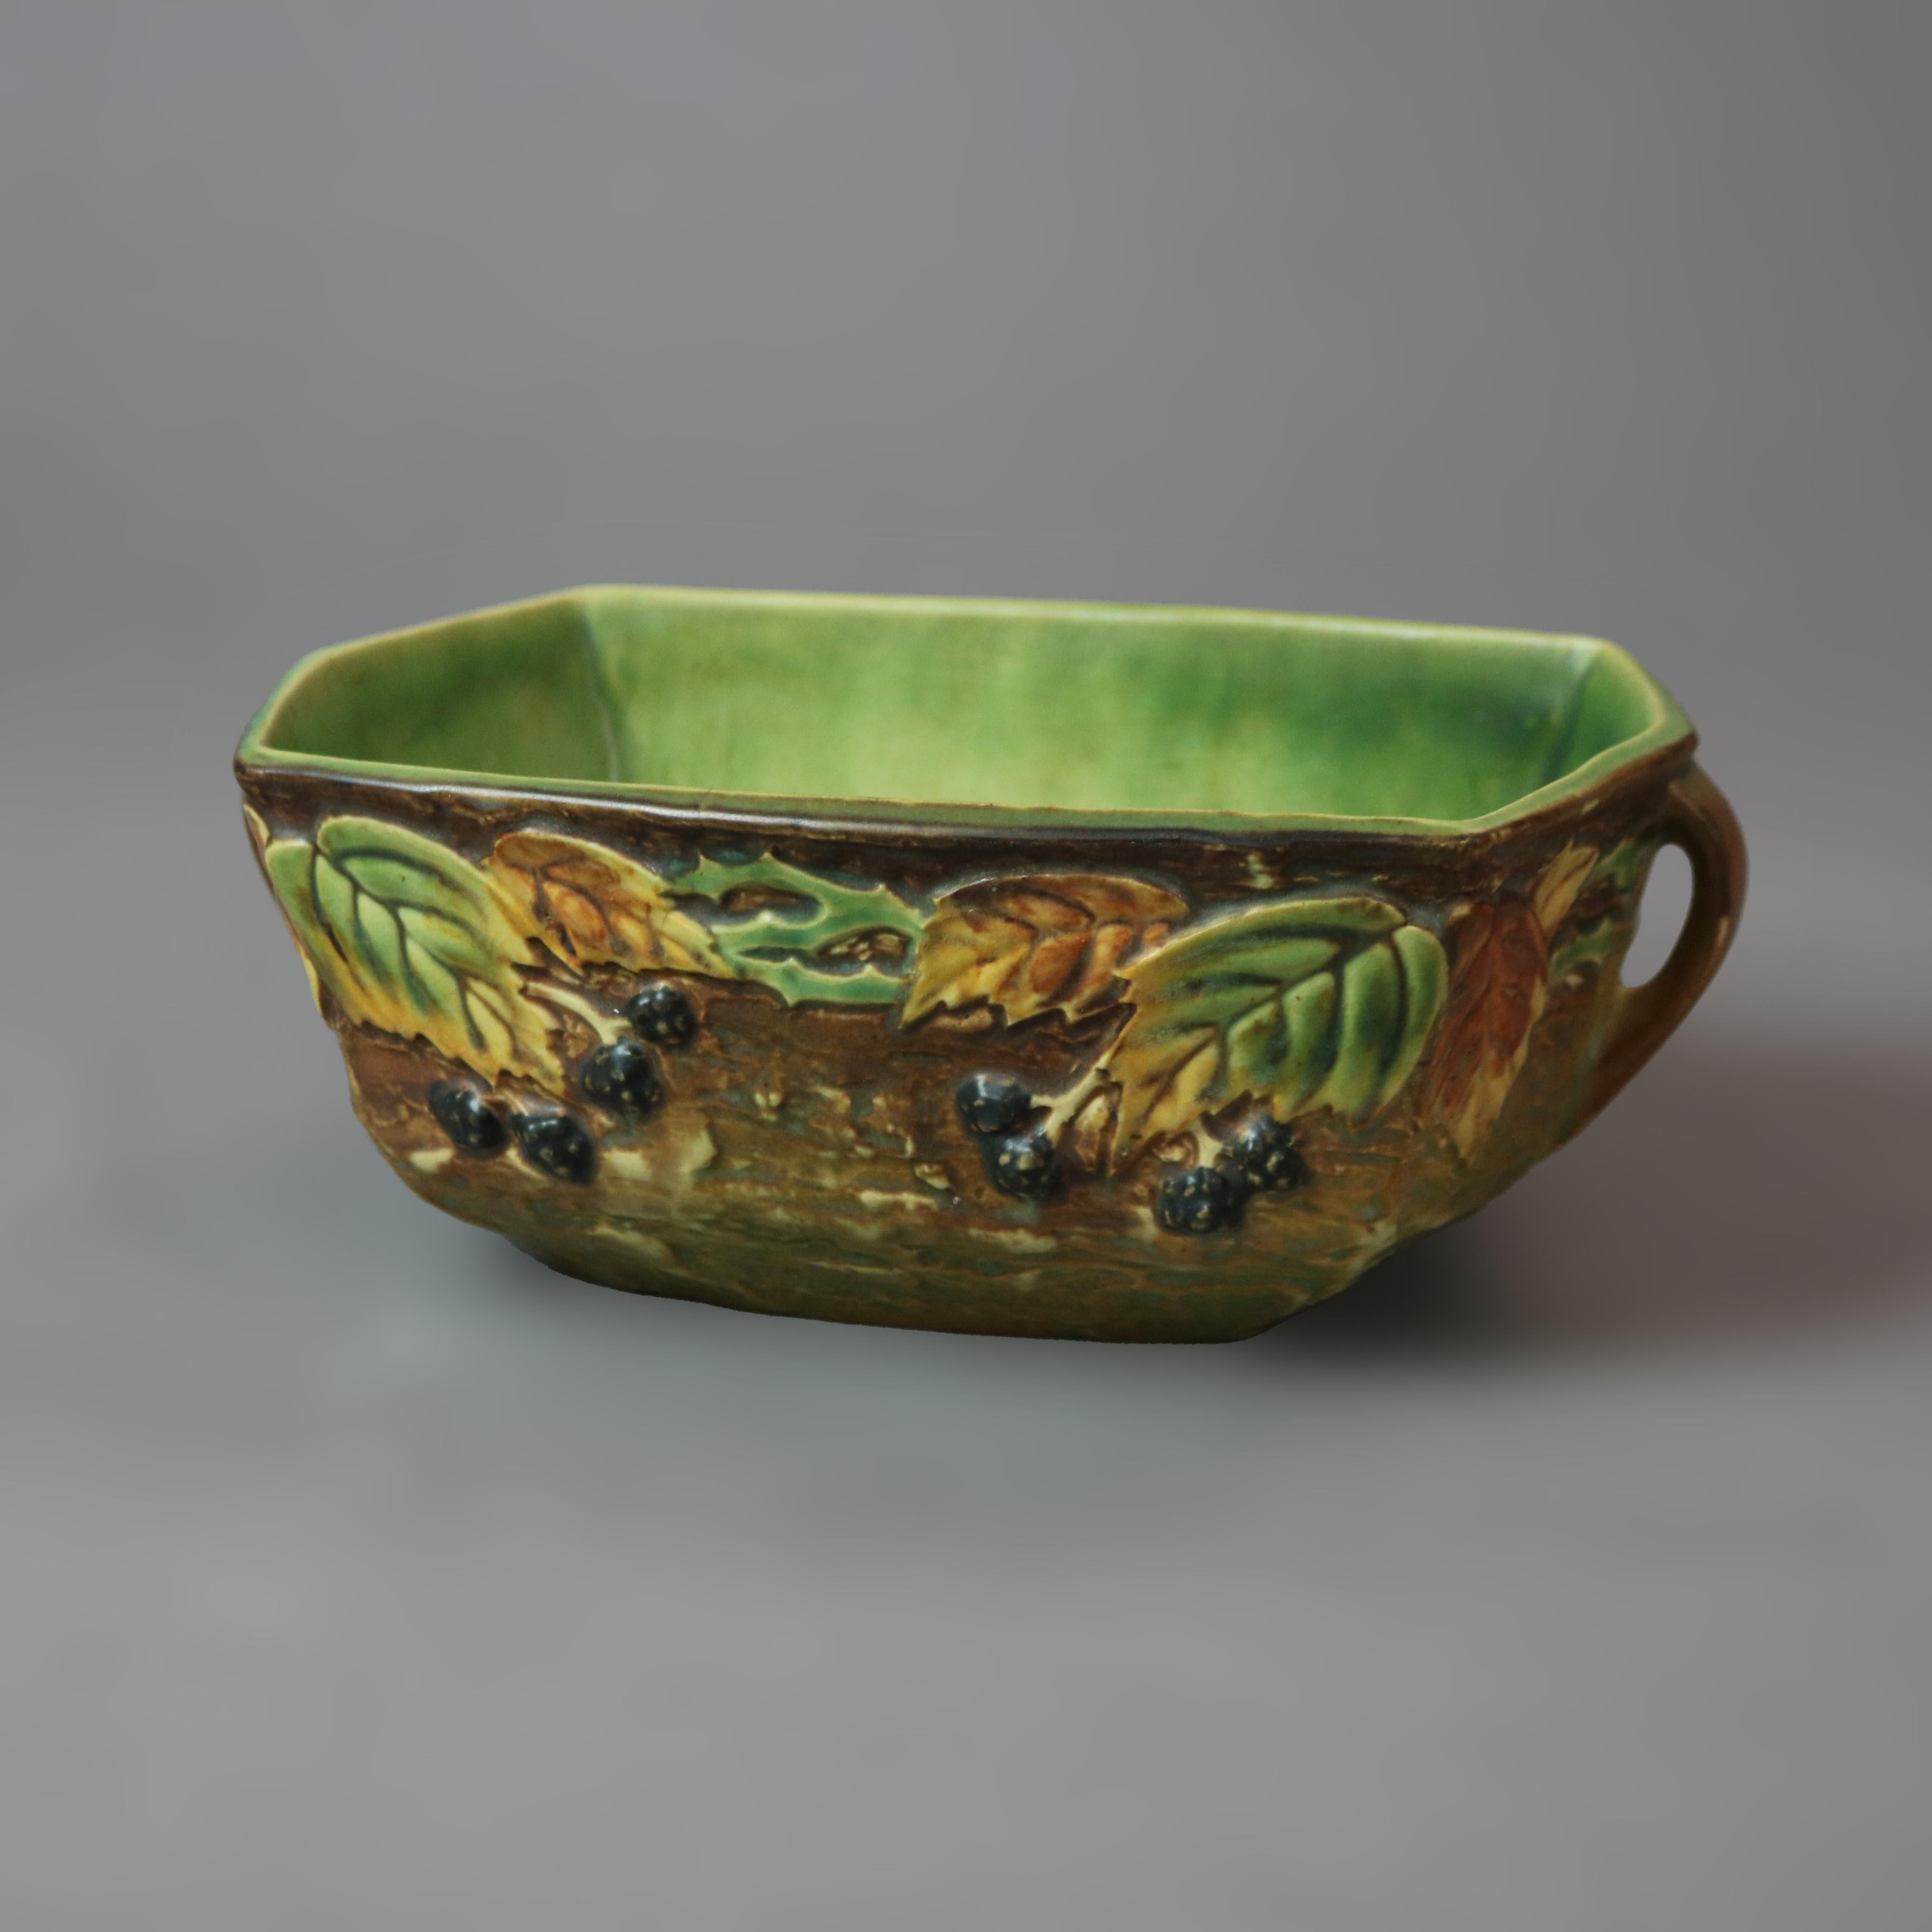 An antique Roseville Blackberry bowl offers art pottery construction with bark form finish and having flanking handles, circa 1930

Measures - 3.75